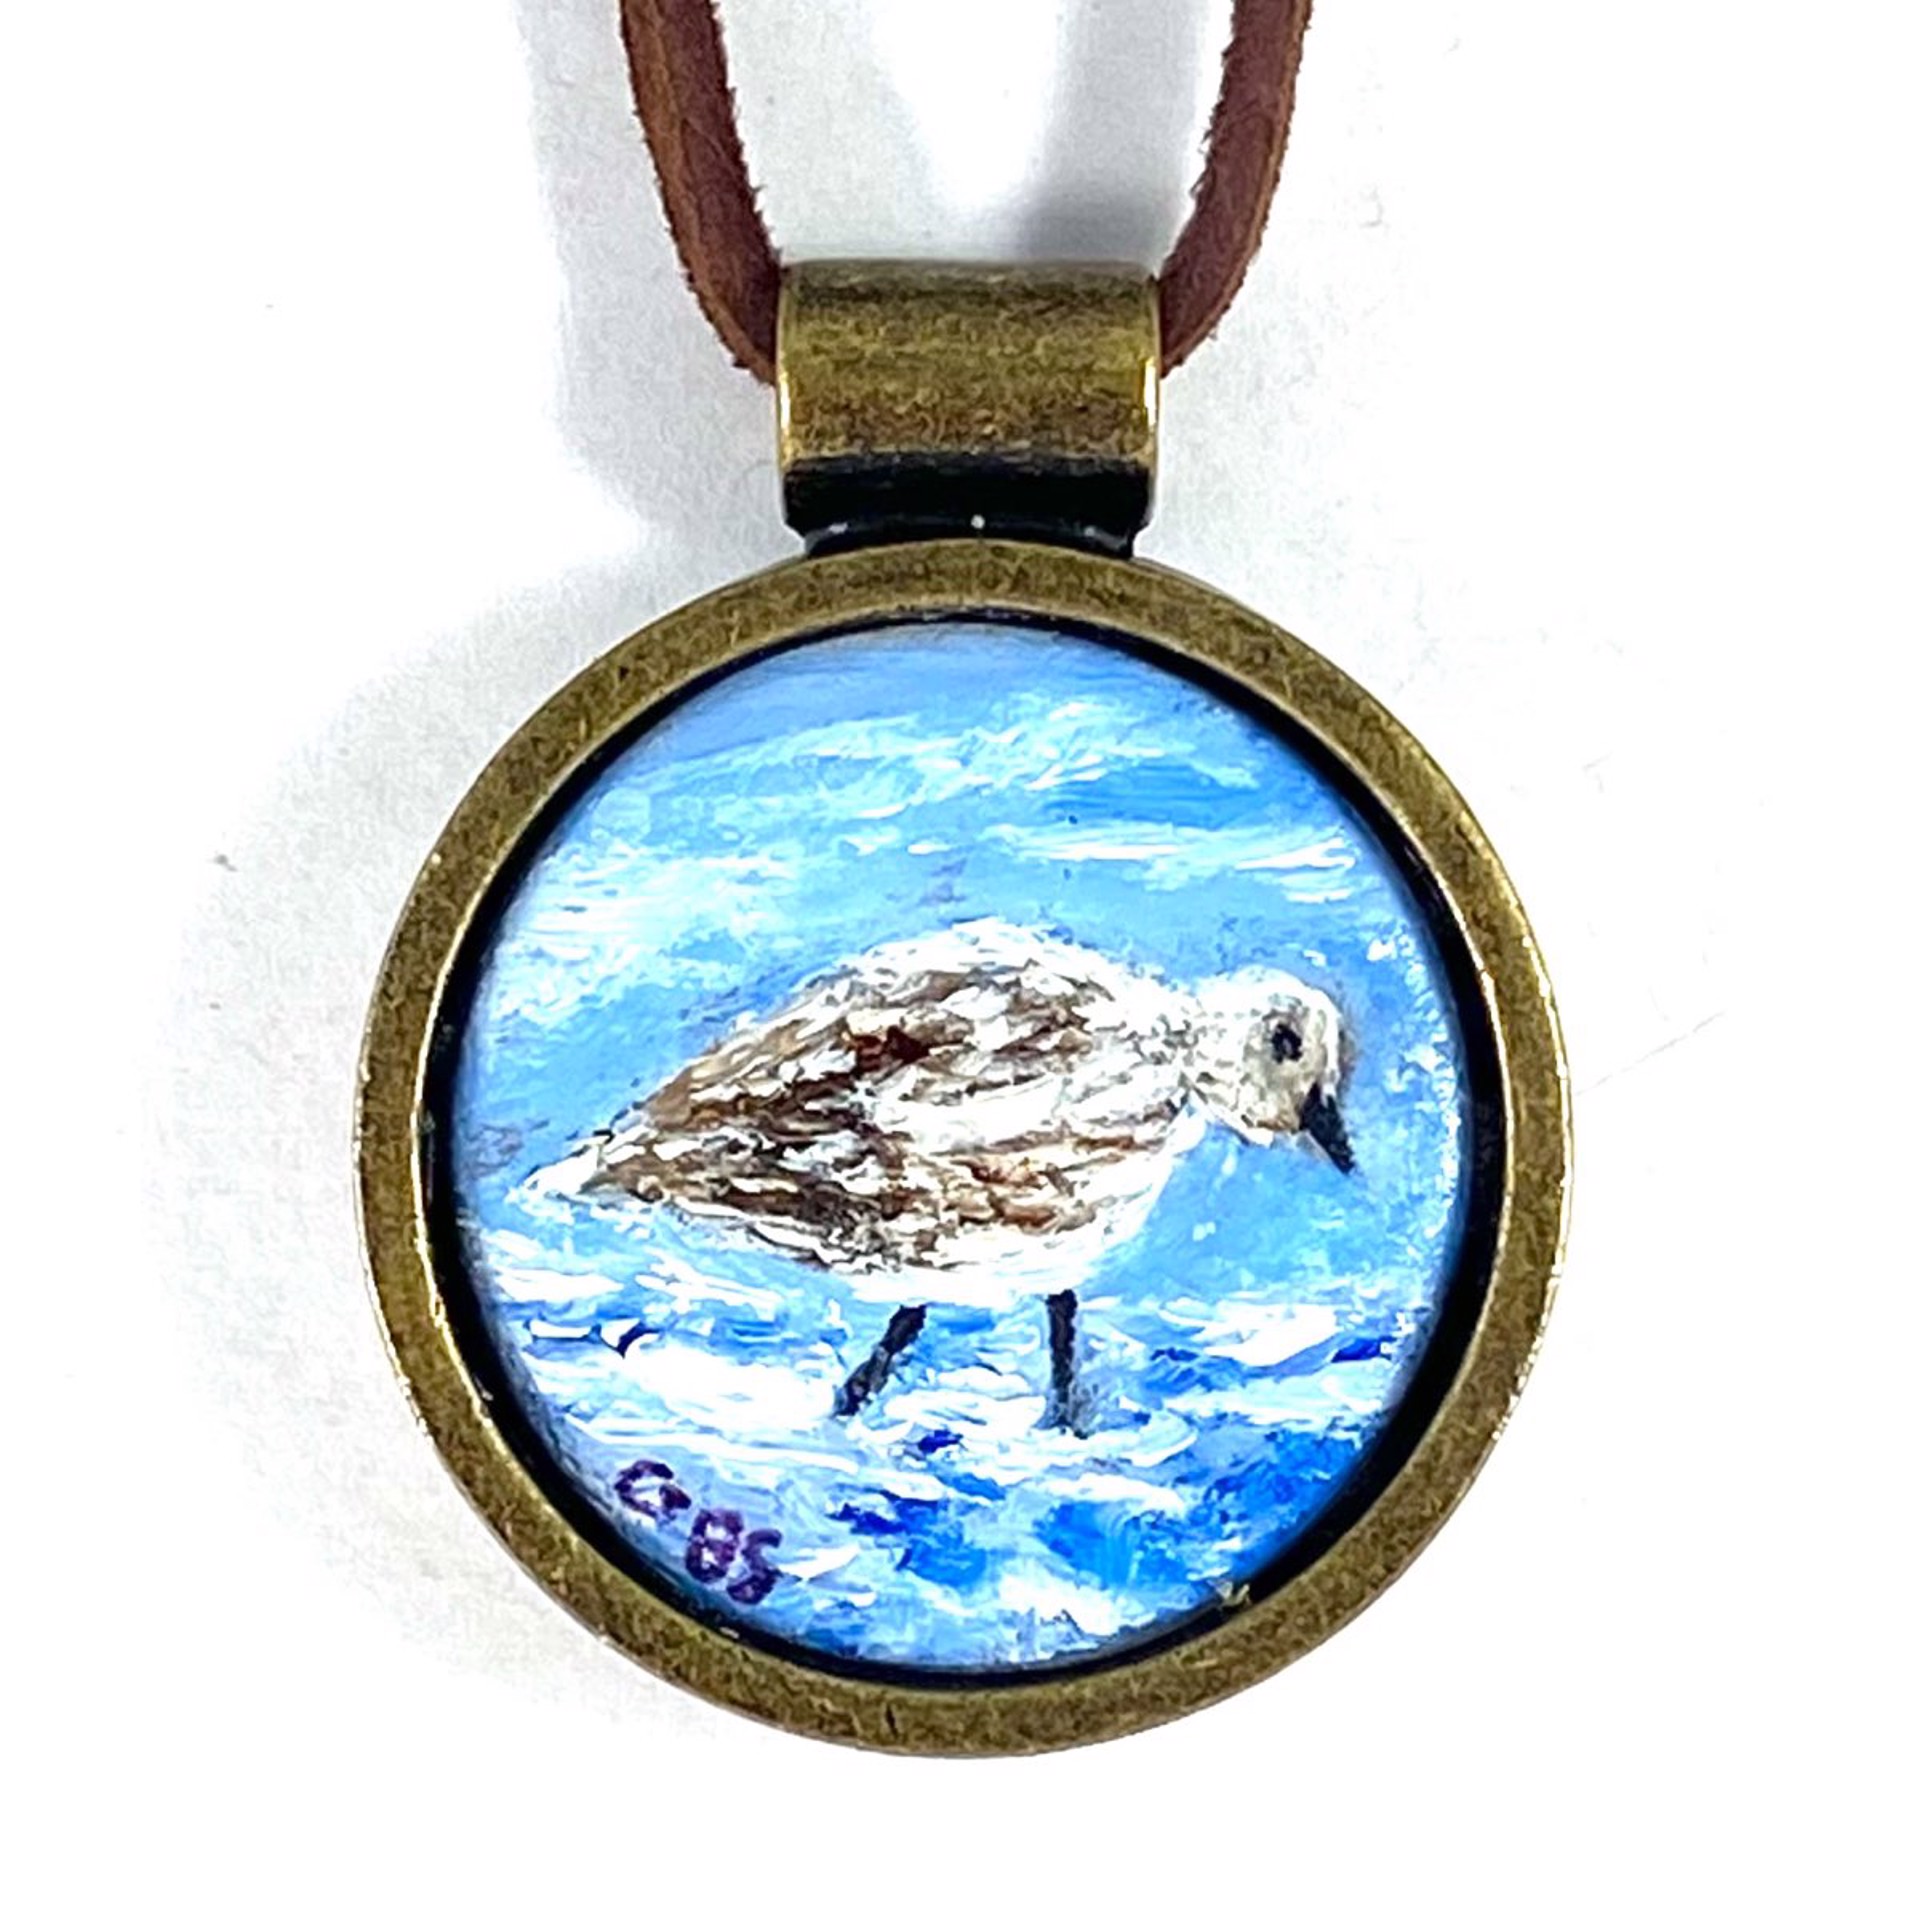 Sandpiper in The Surf-pendent on leather by Barbara Sawyer